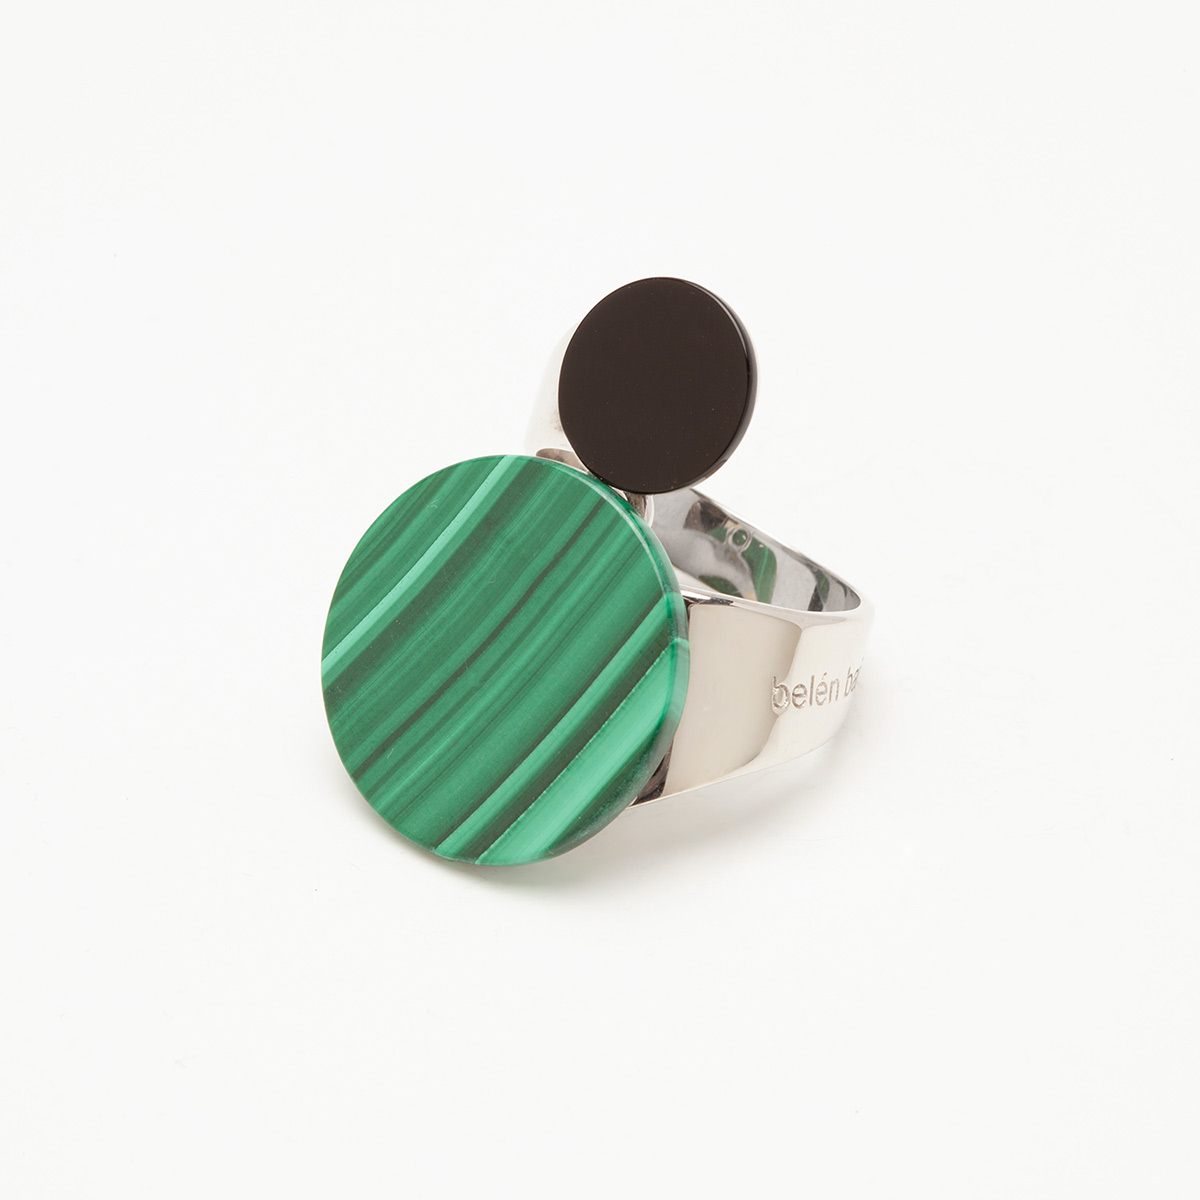 Ozu handmade sterling silver, onyx and malachite ring designed by Belen Bajo